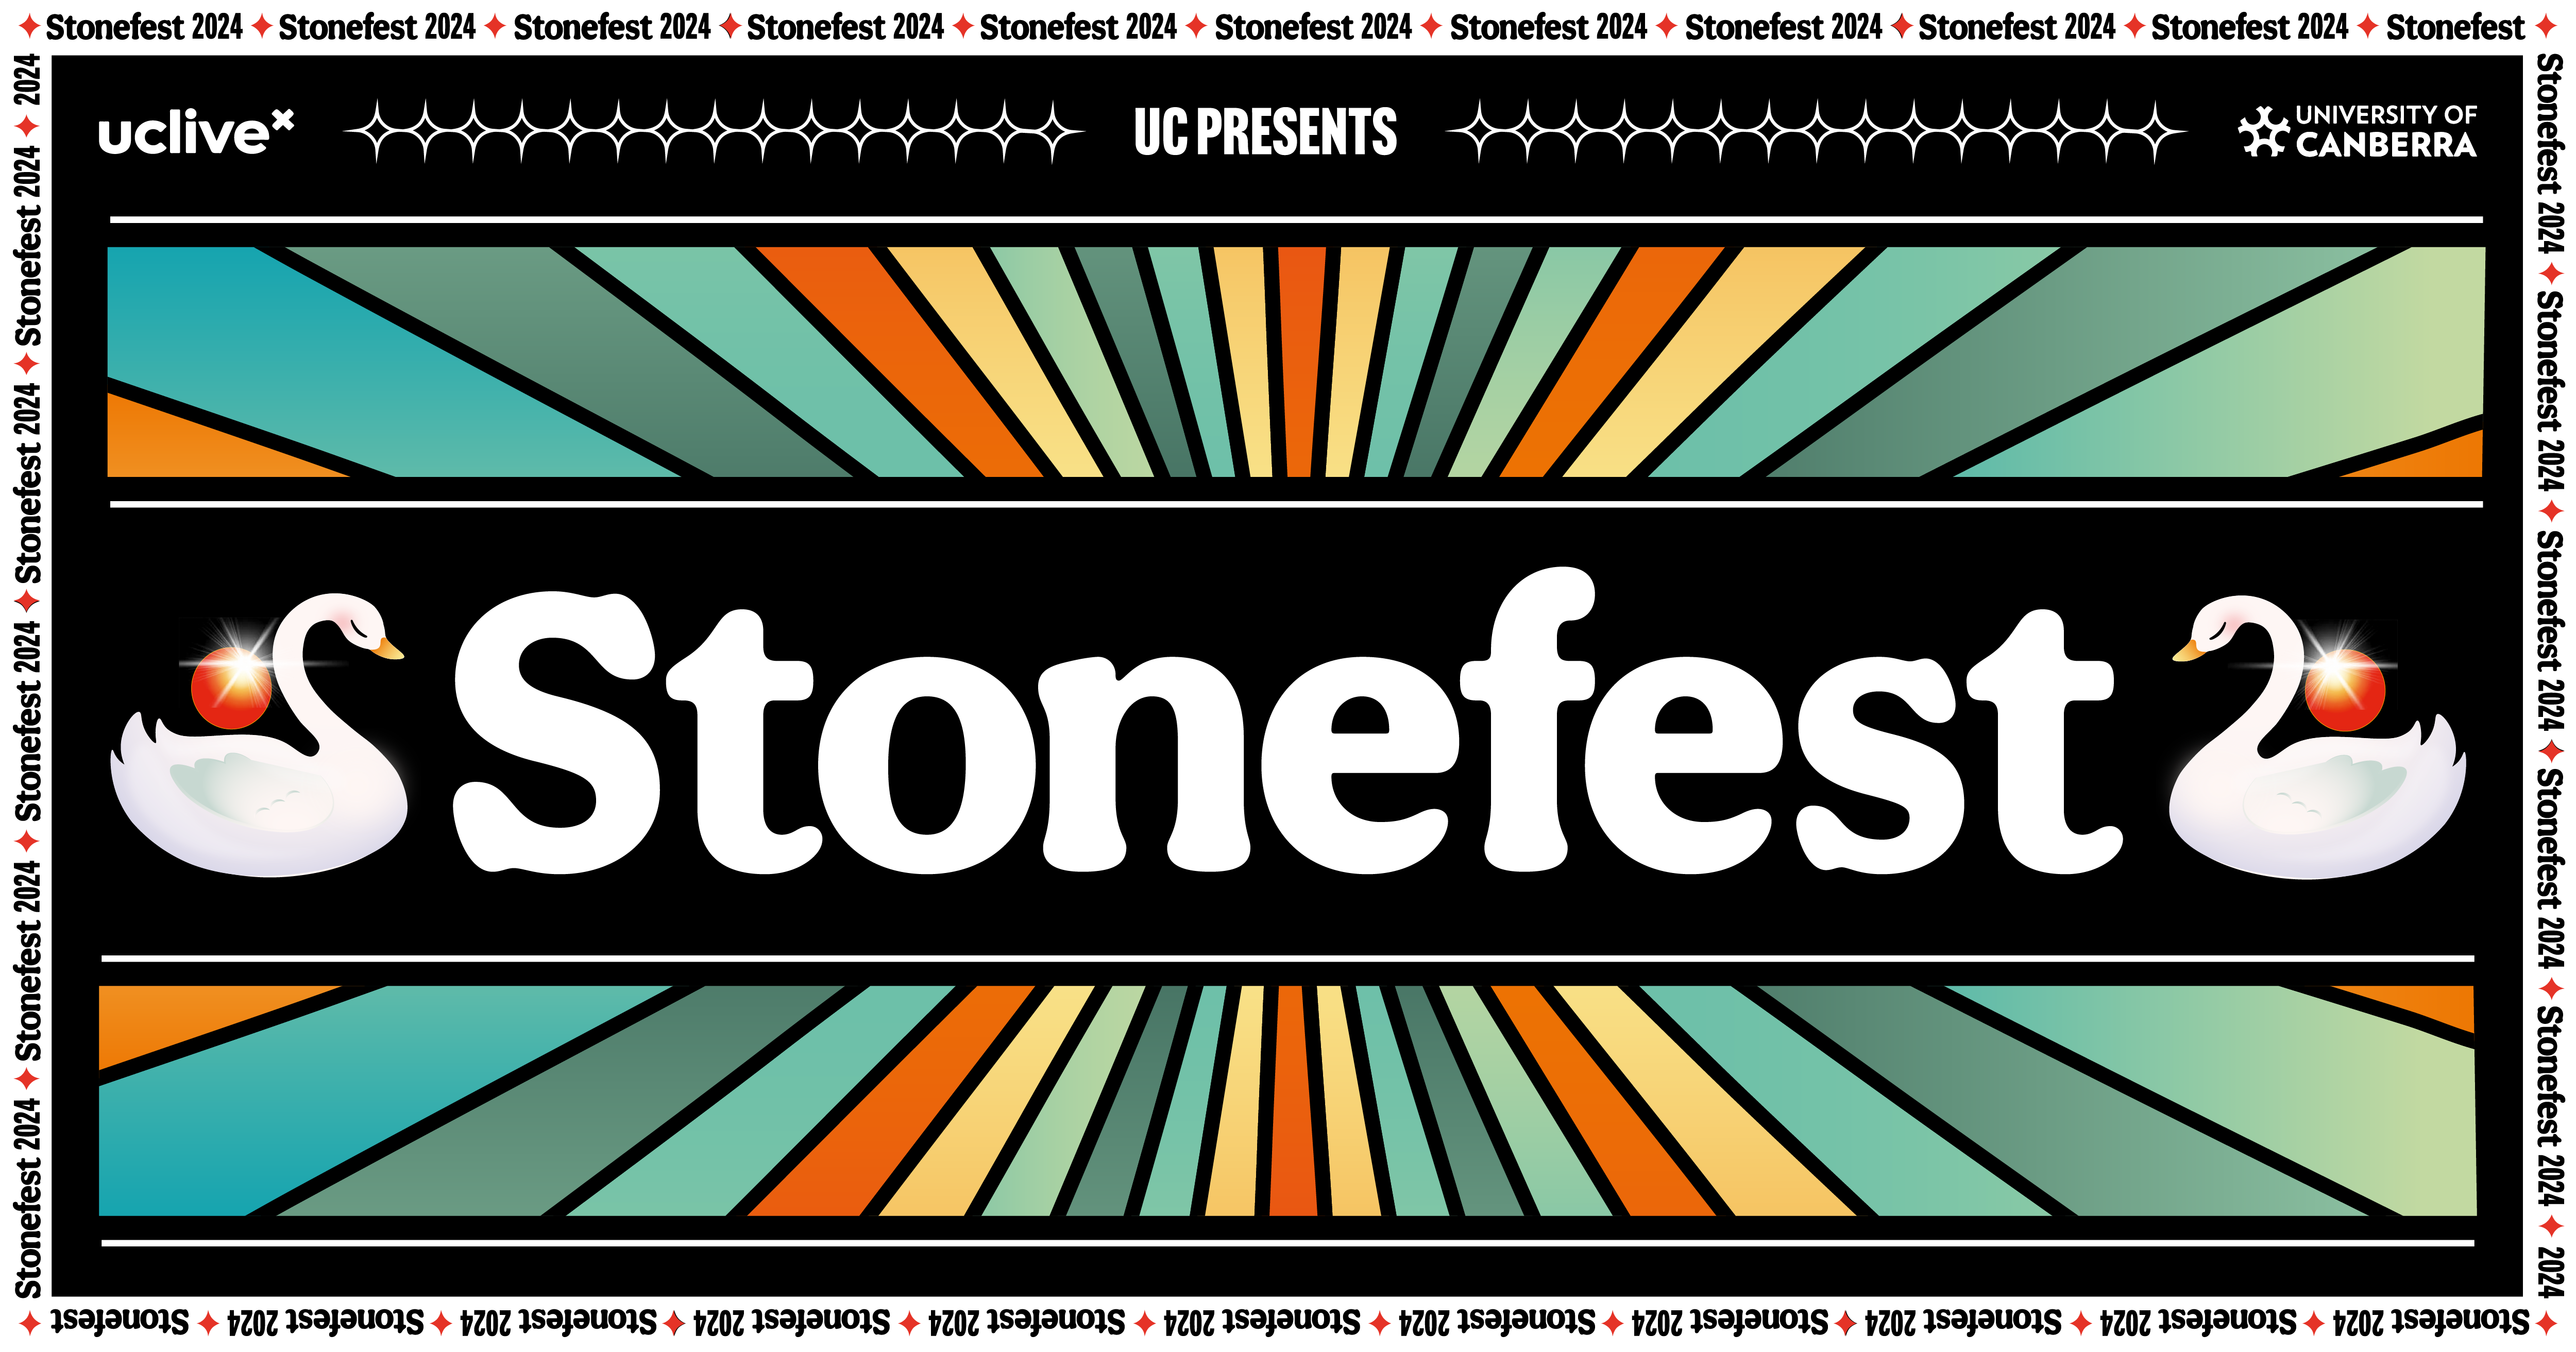 Feast Your Eyes On The Epic Stonfest Lineup! 